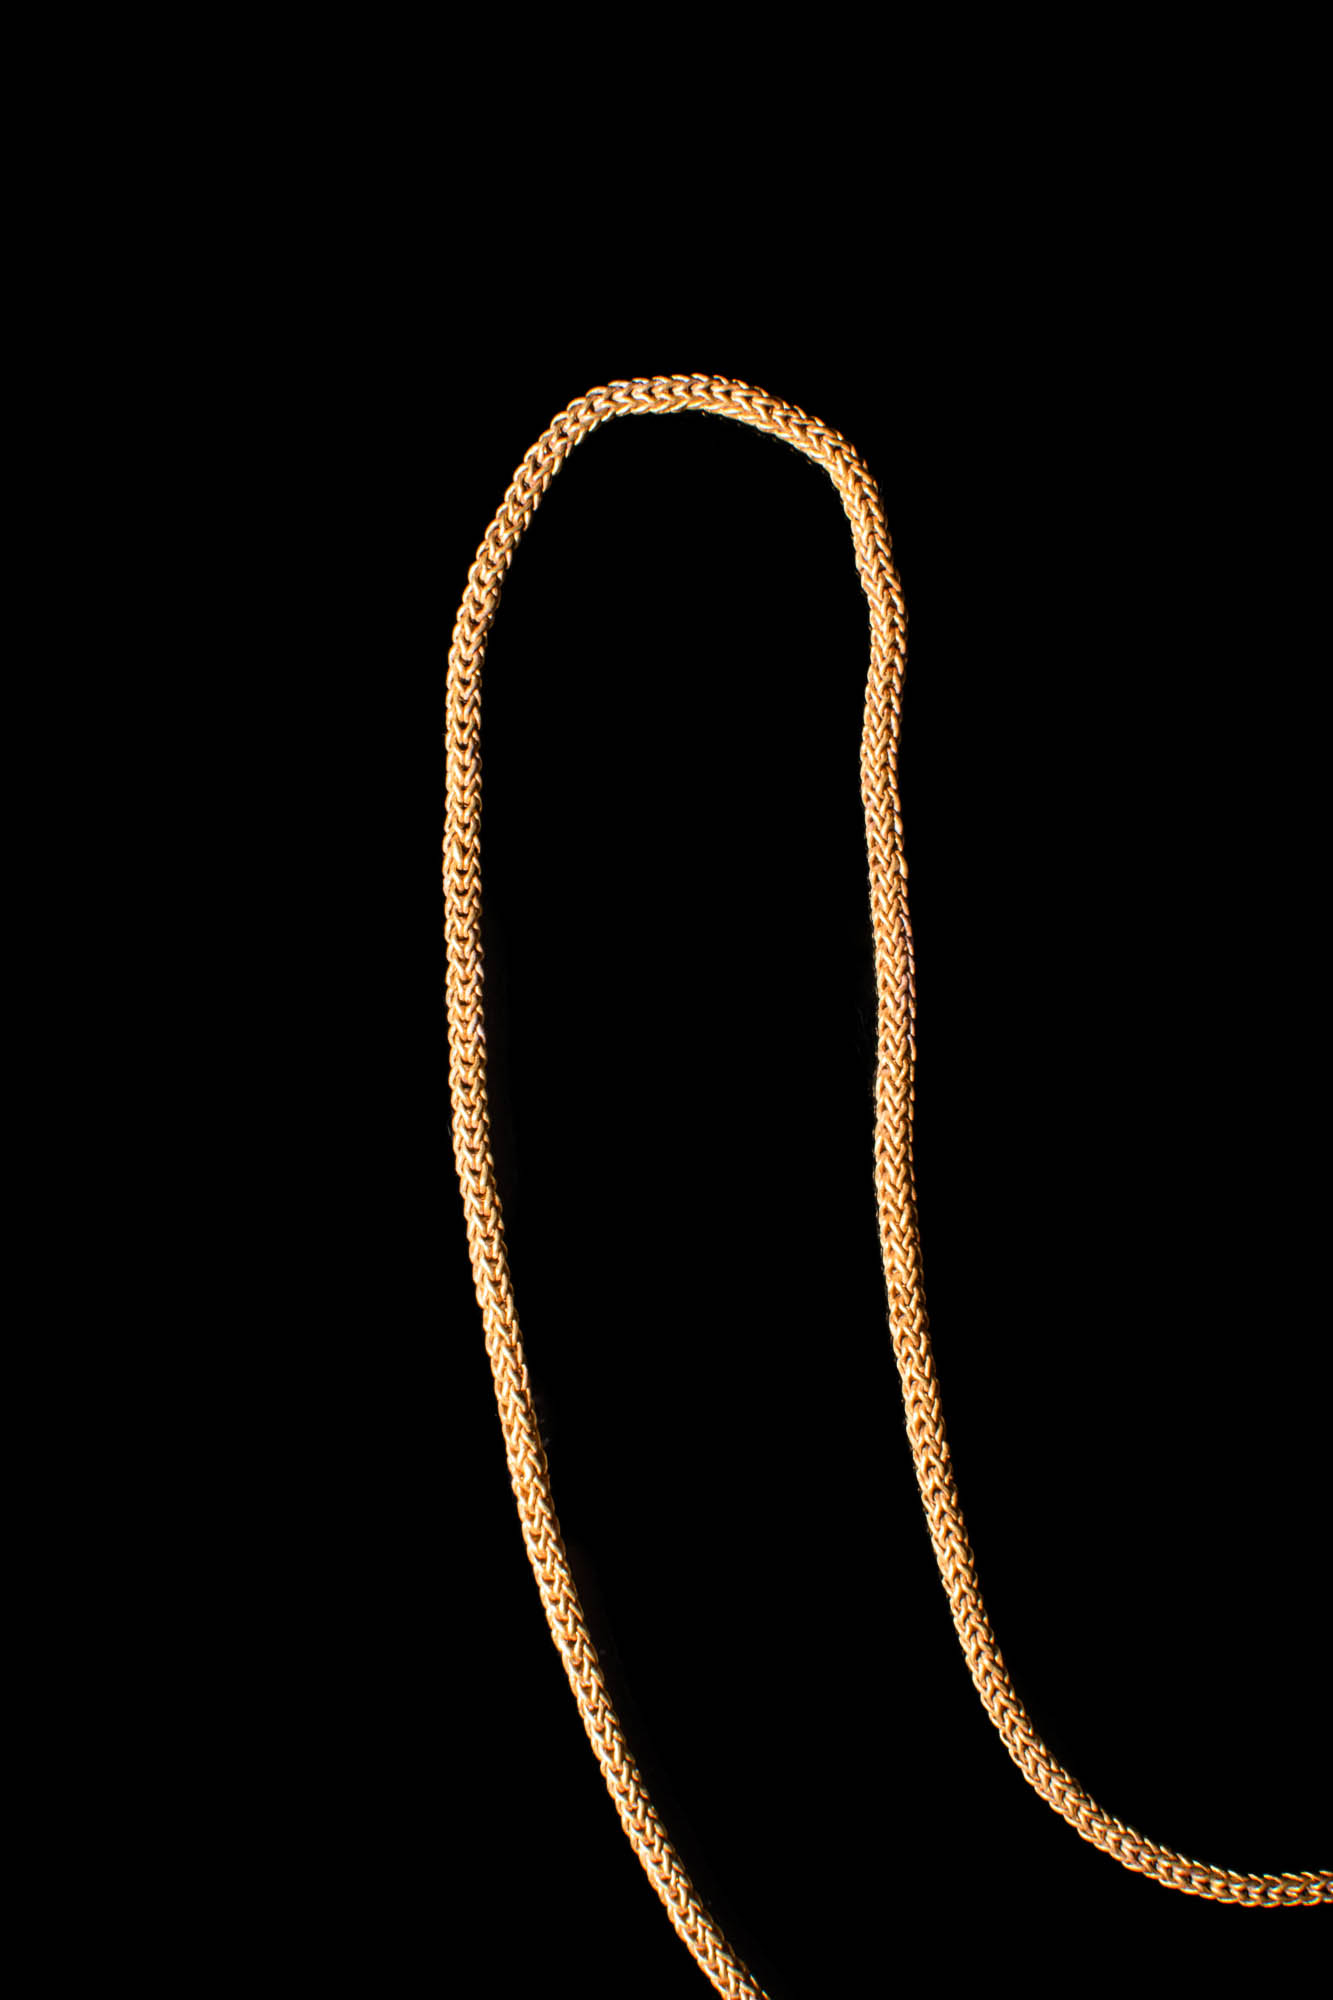 HEAVY HELLENISTIC GOLD CHAIN - Image 2 of 3